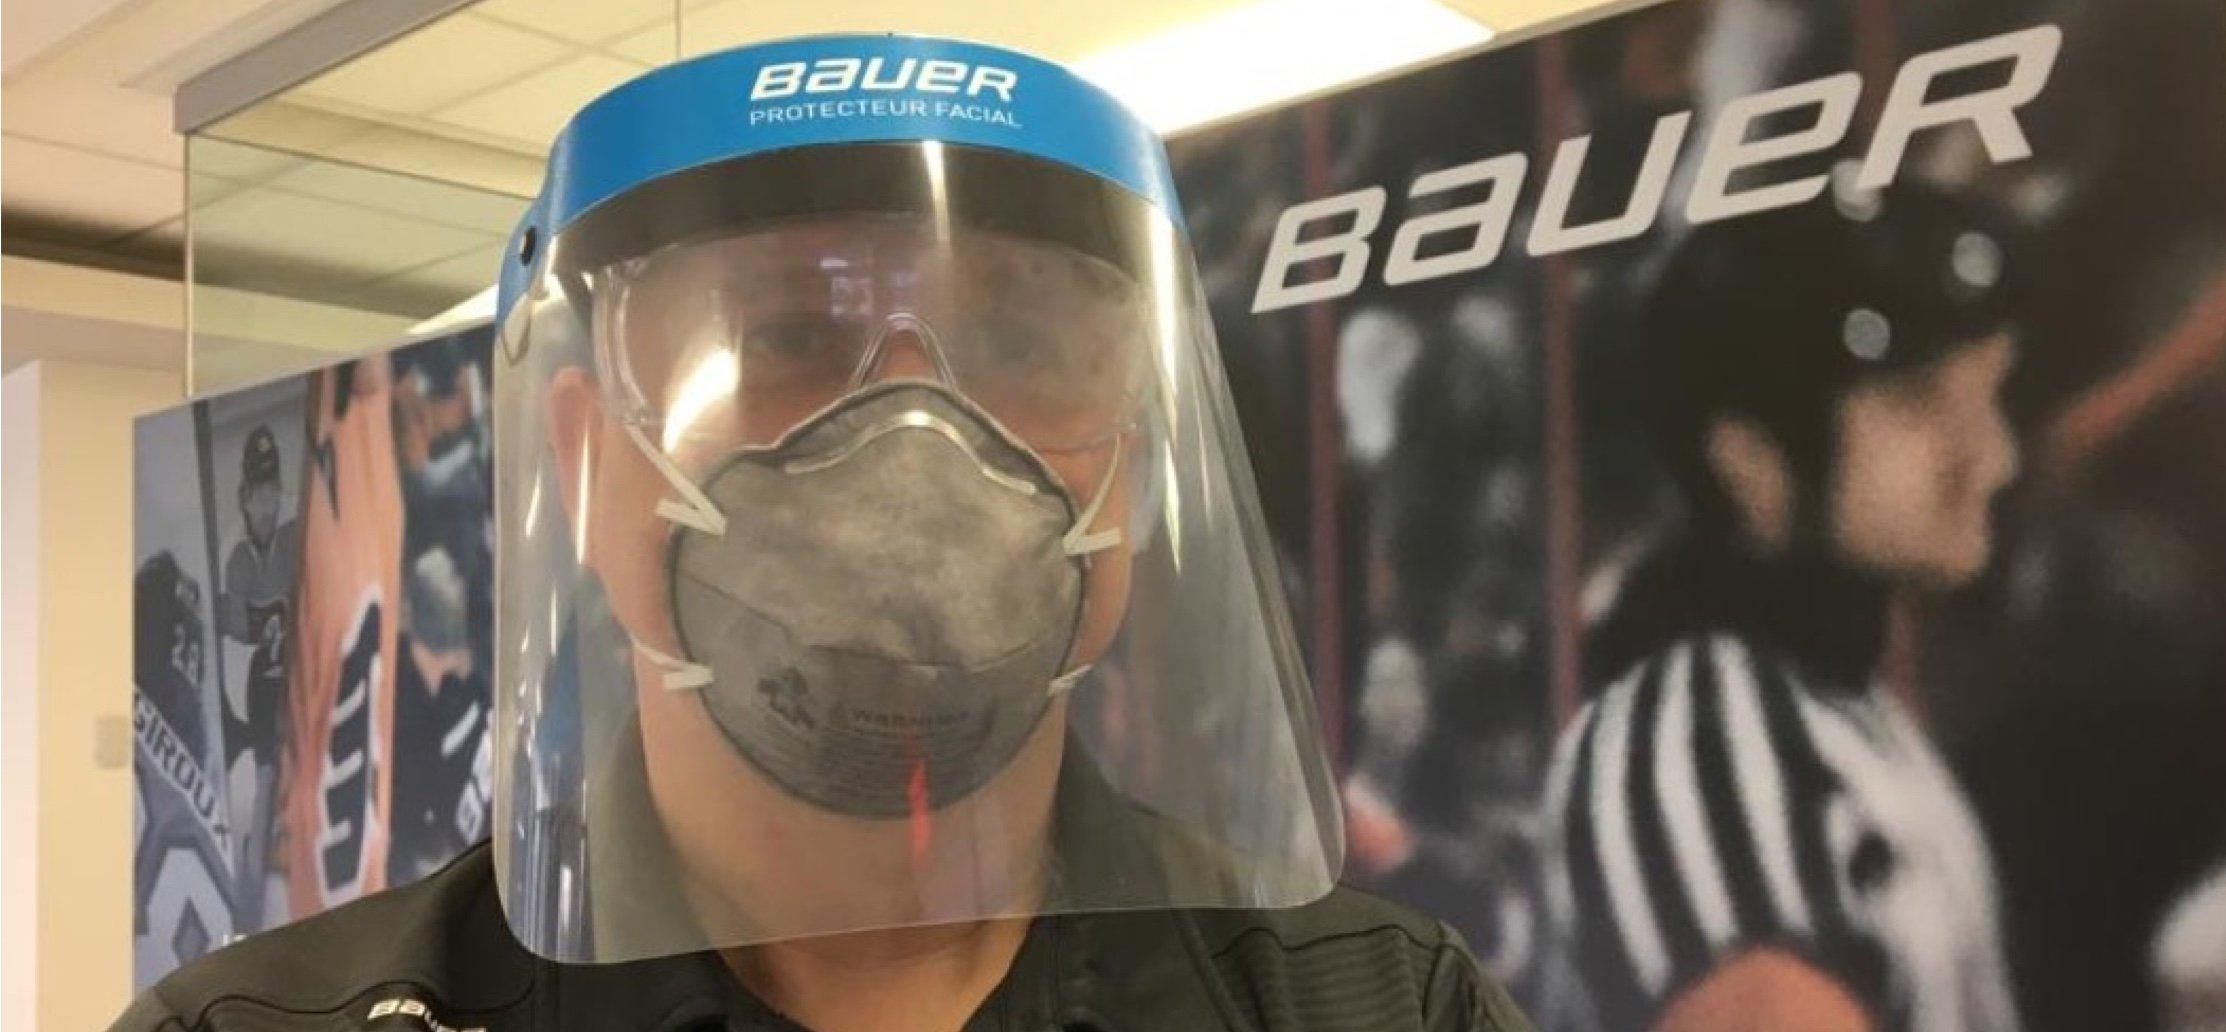 Bauer Medical Face Shield Faq Page Bauer